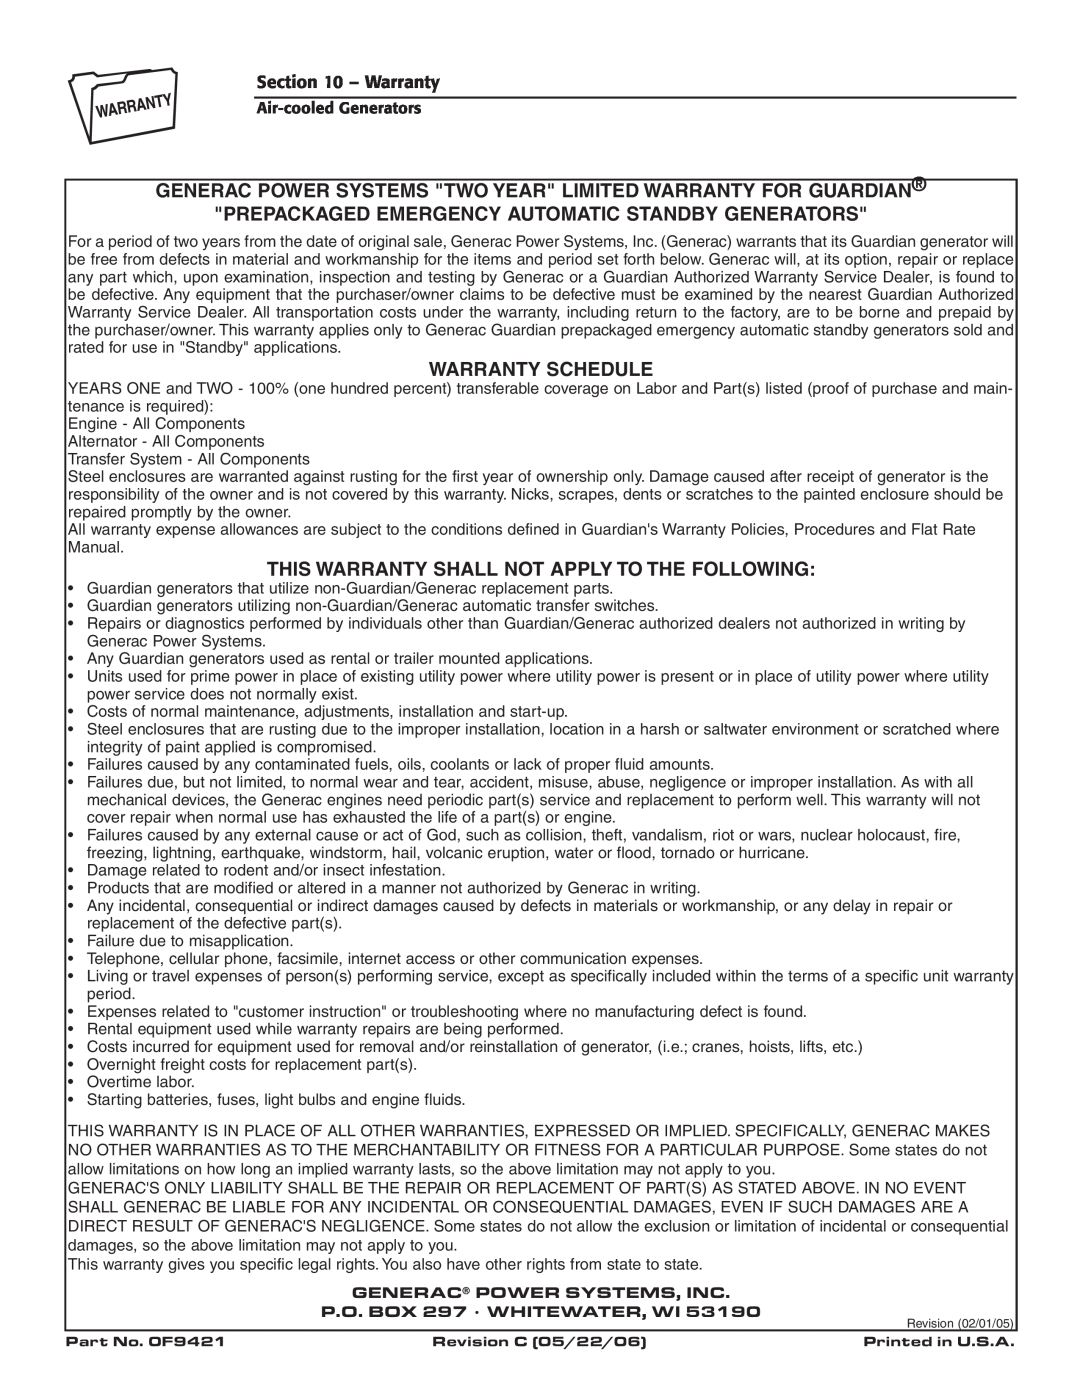 Guardian Technologies 005283 Warranty Schedule, This Warranty Shall Not Apply To The Following, Air-cooledGenerators 